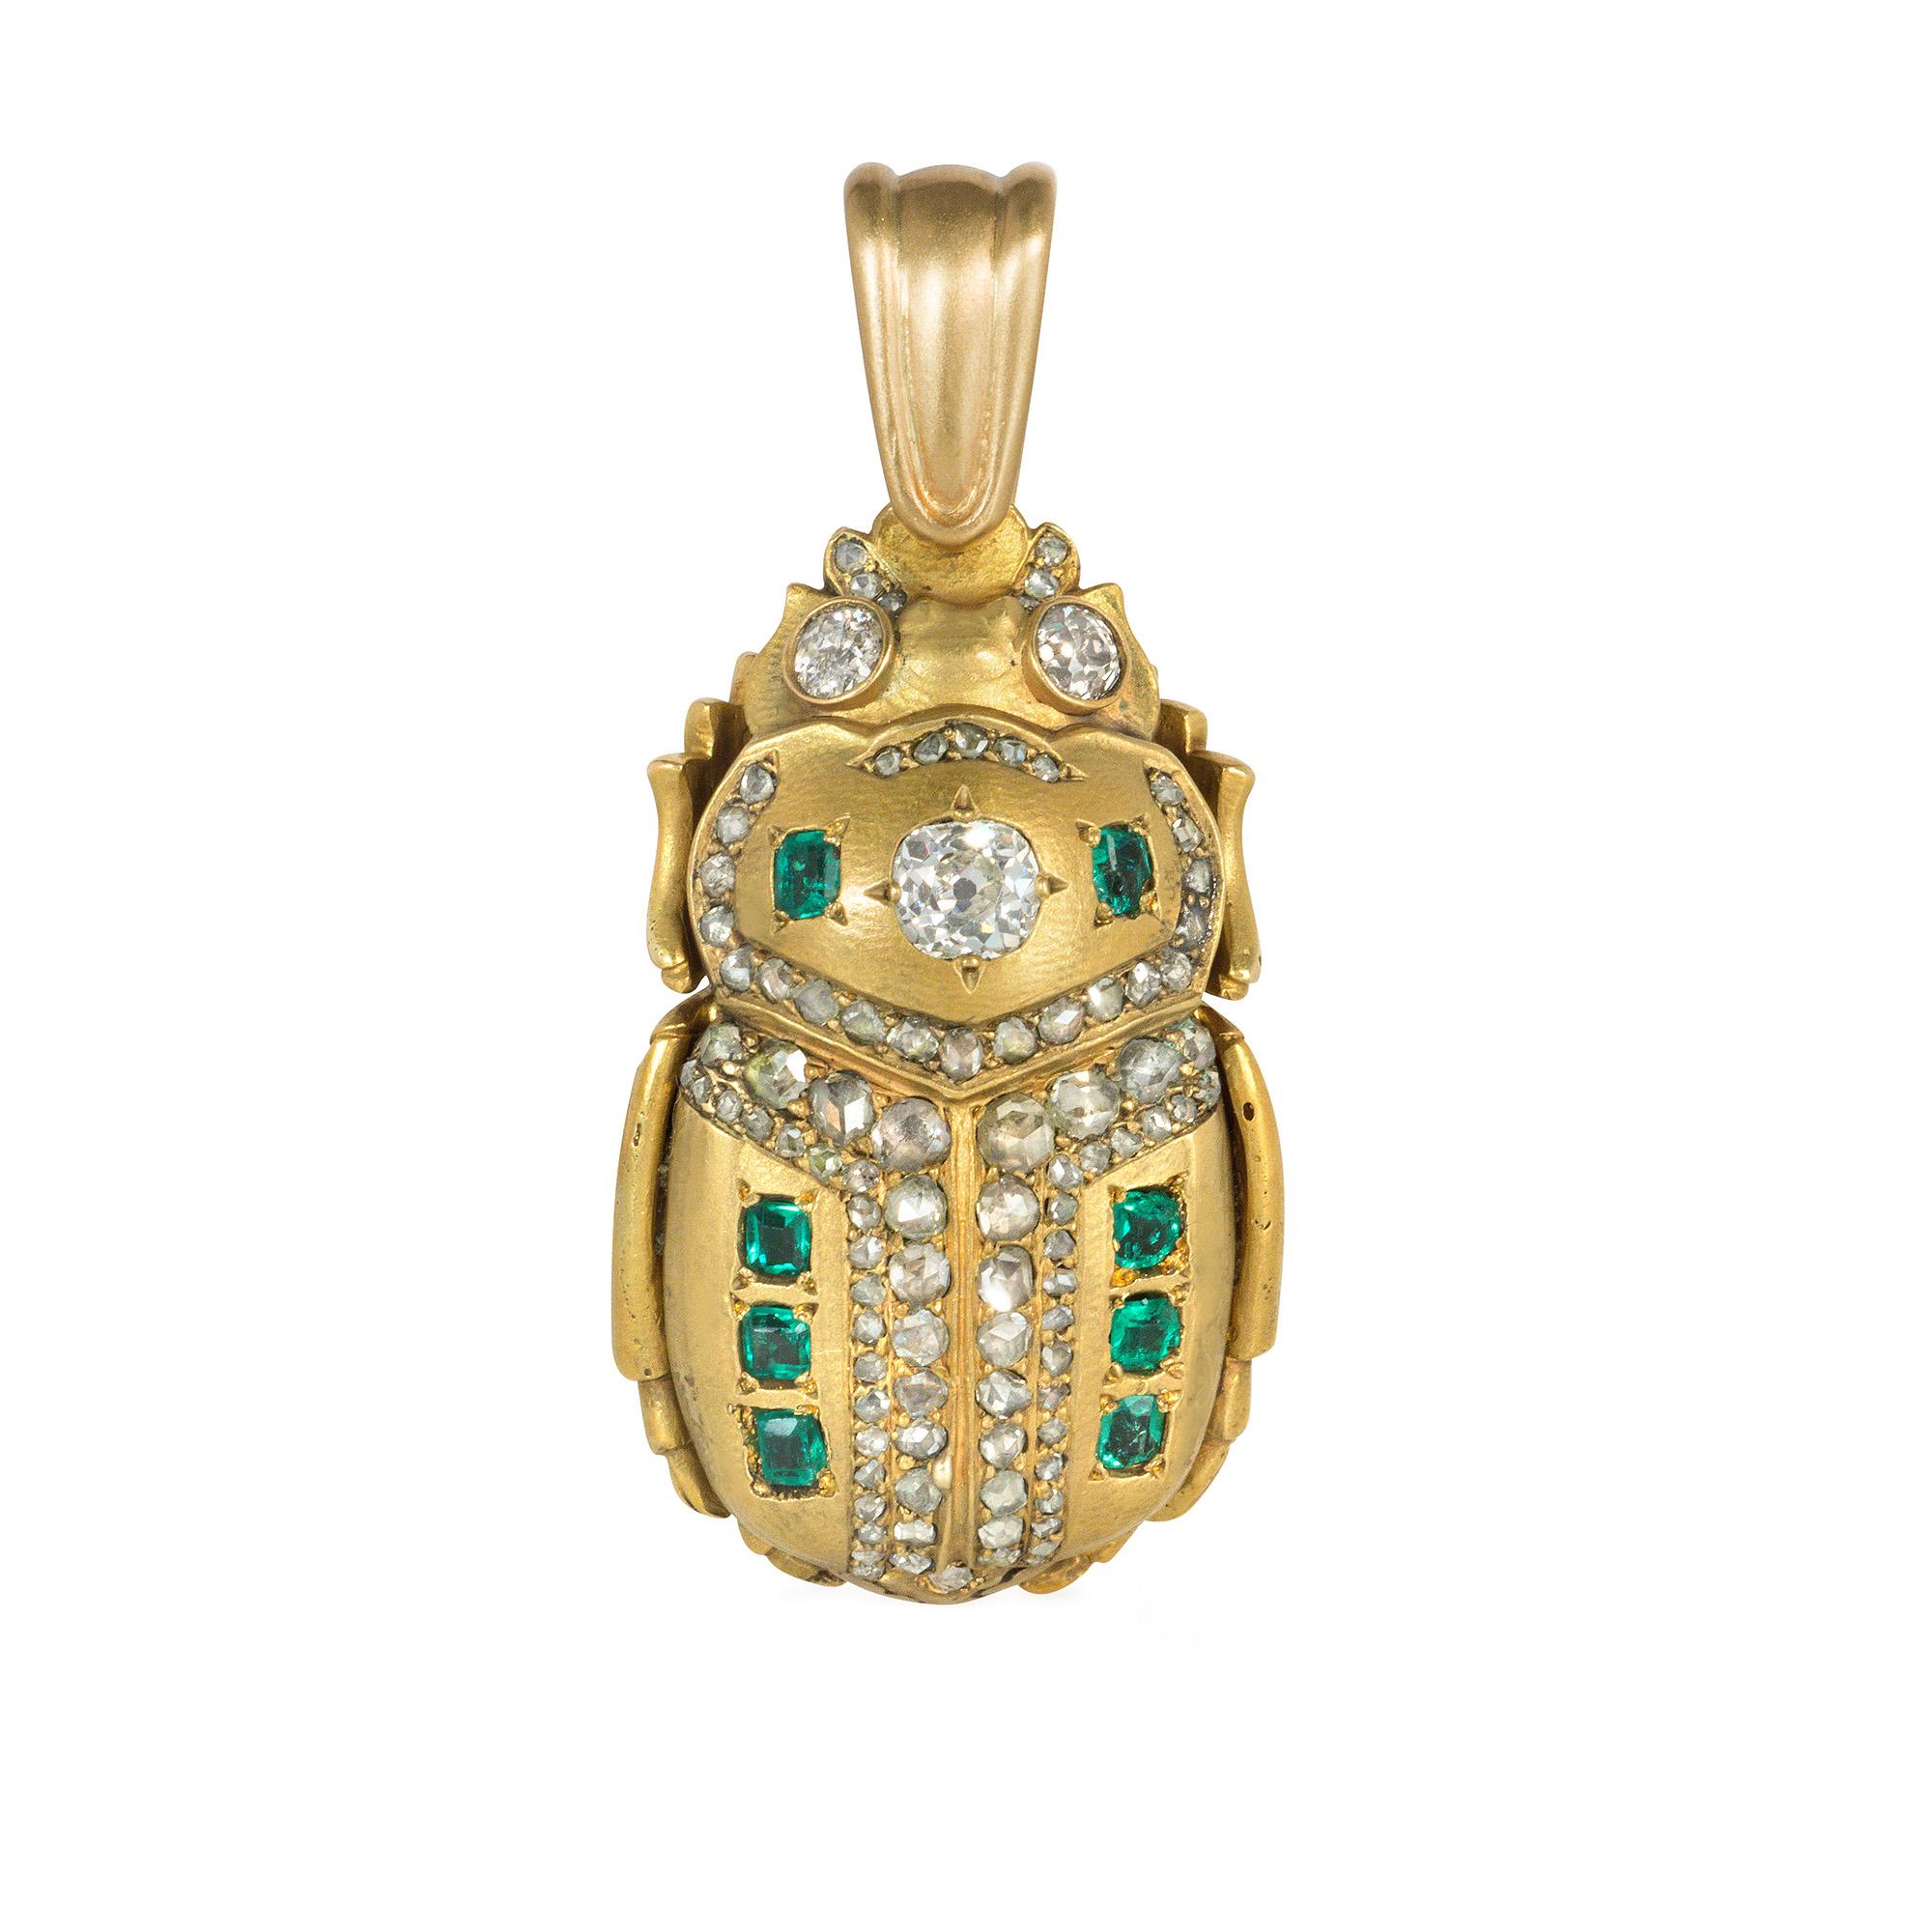 An antique Egyptian Revival convertible gold and gem-set pendant-brooch in the form of a scarab, the back adorned with emeralds and old-mine-cut, cushion-cut, and rose-cut diamonds, the legs and underside realistically rendered in gold, with